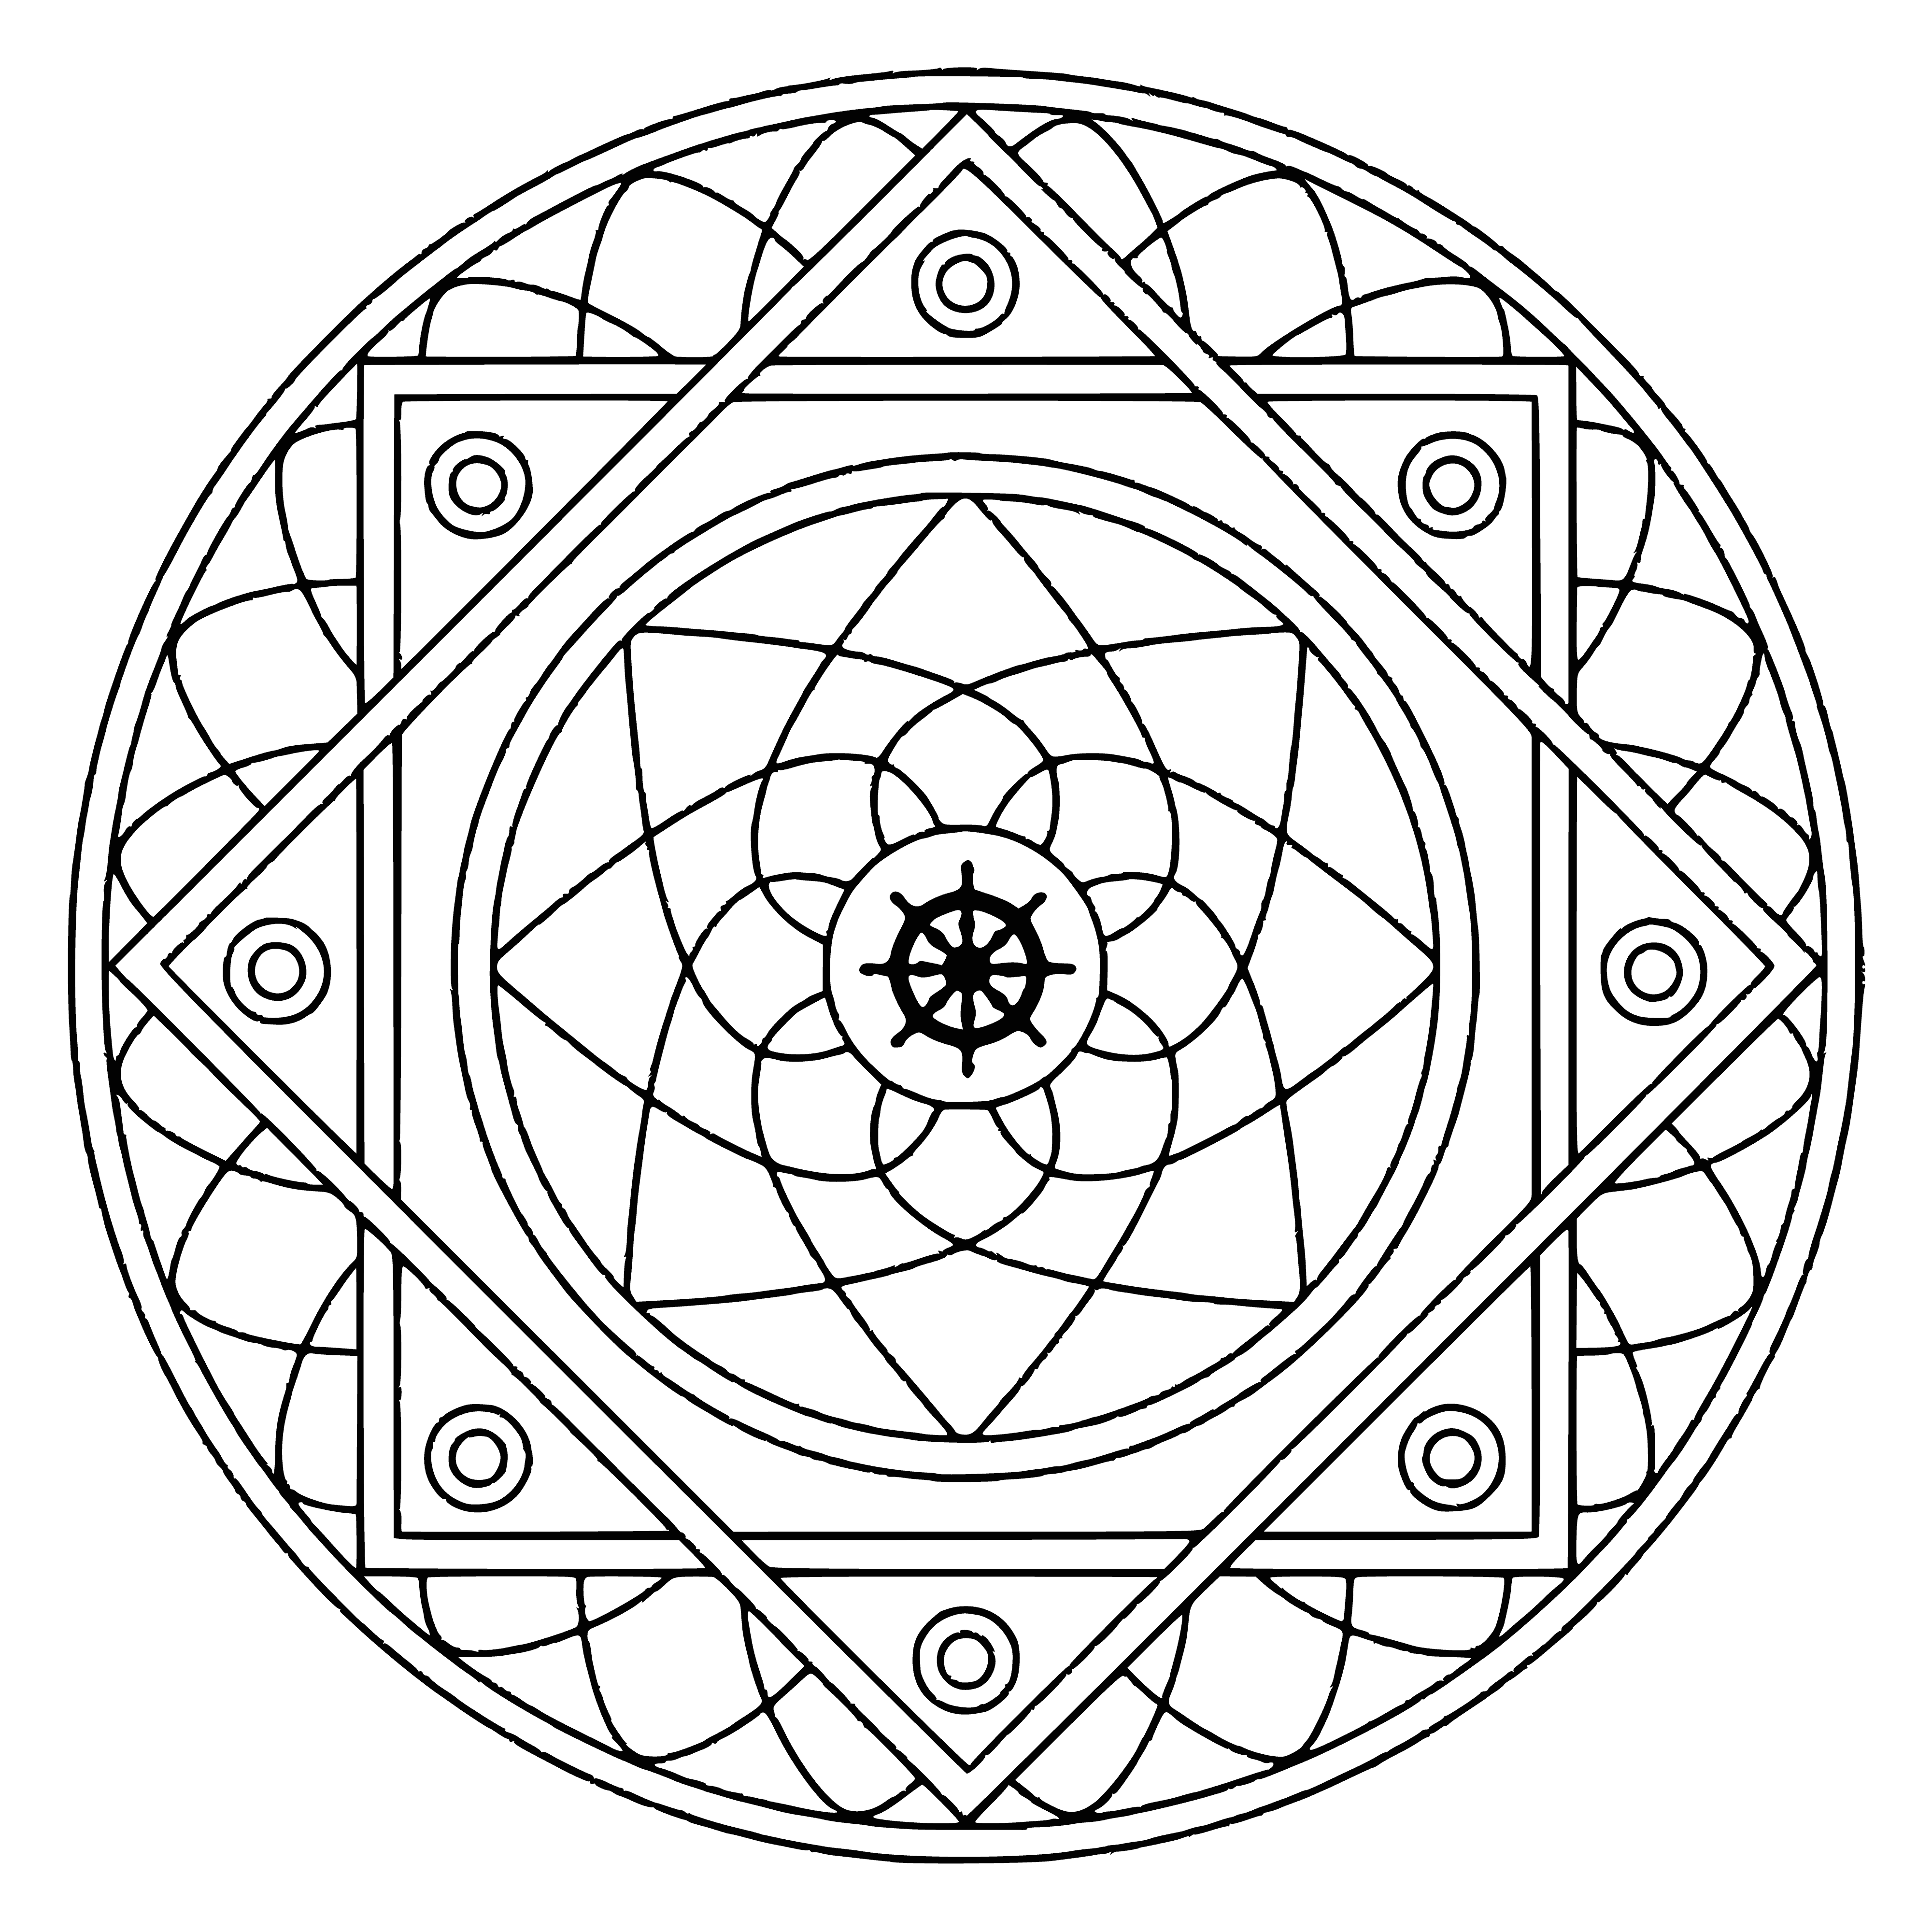 coloring page: A Mandala coloring page with a central symbol surrounded by smaller circles with different colors. #coloringpage #mandala #samsara